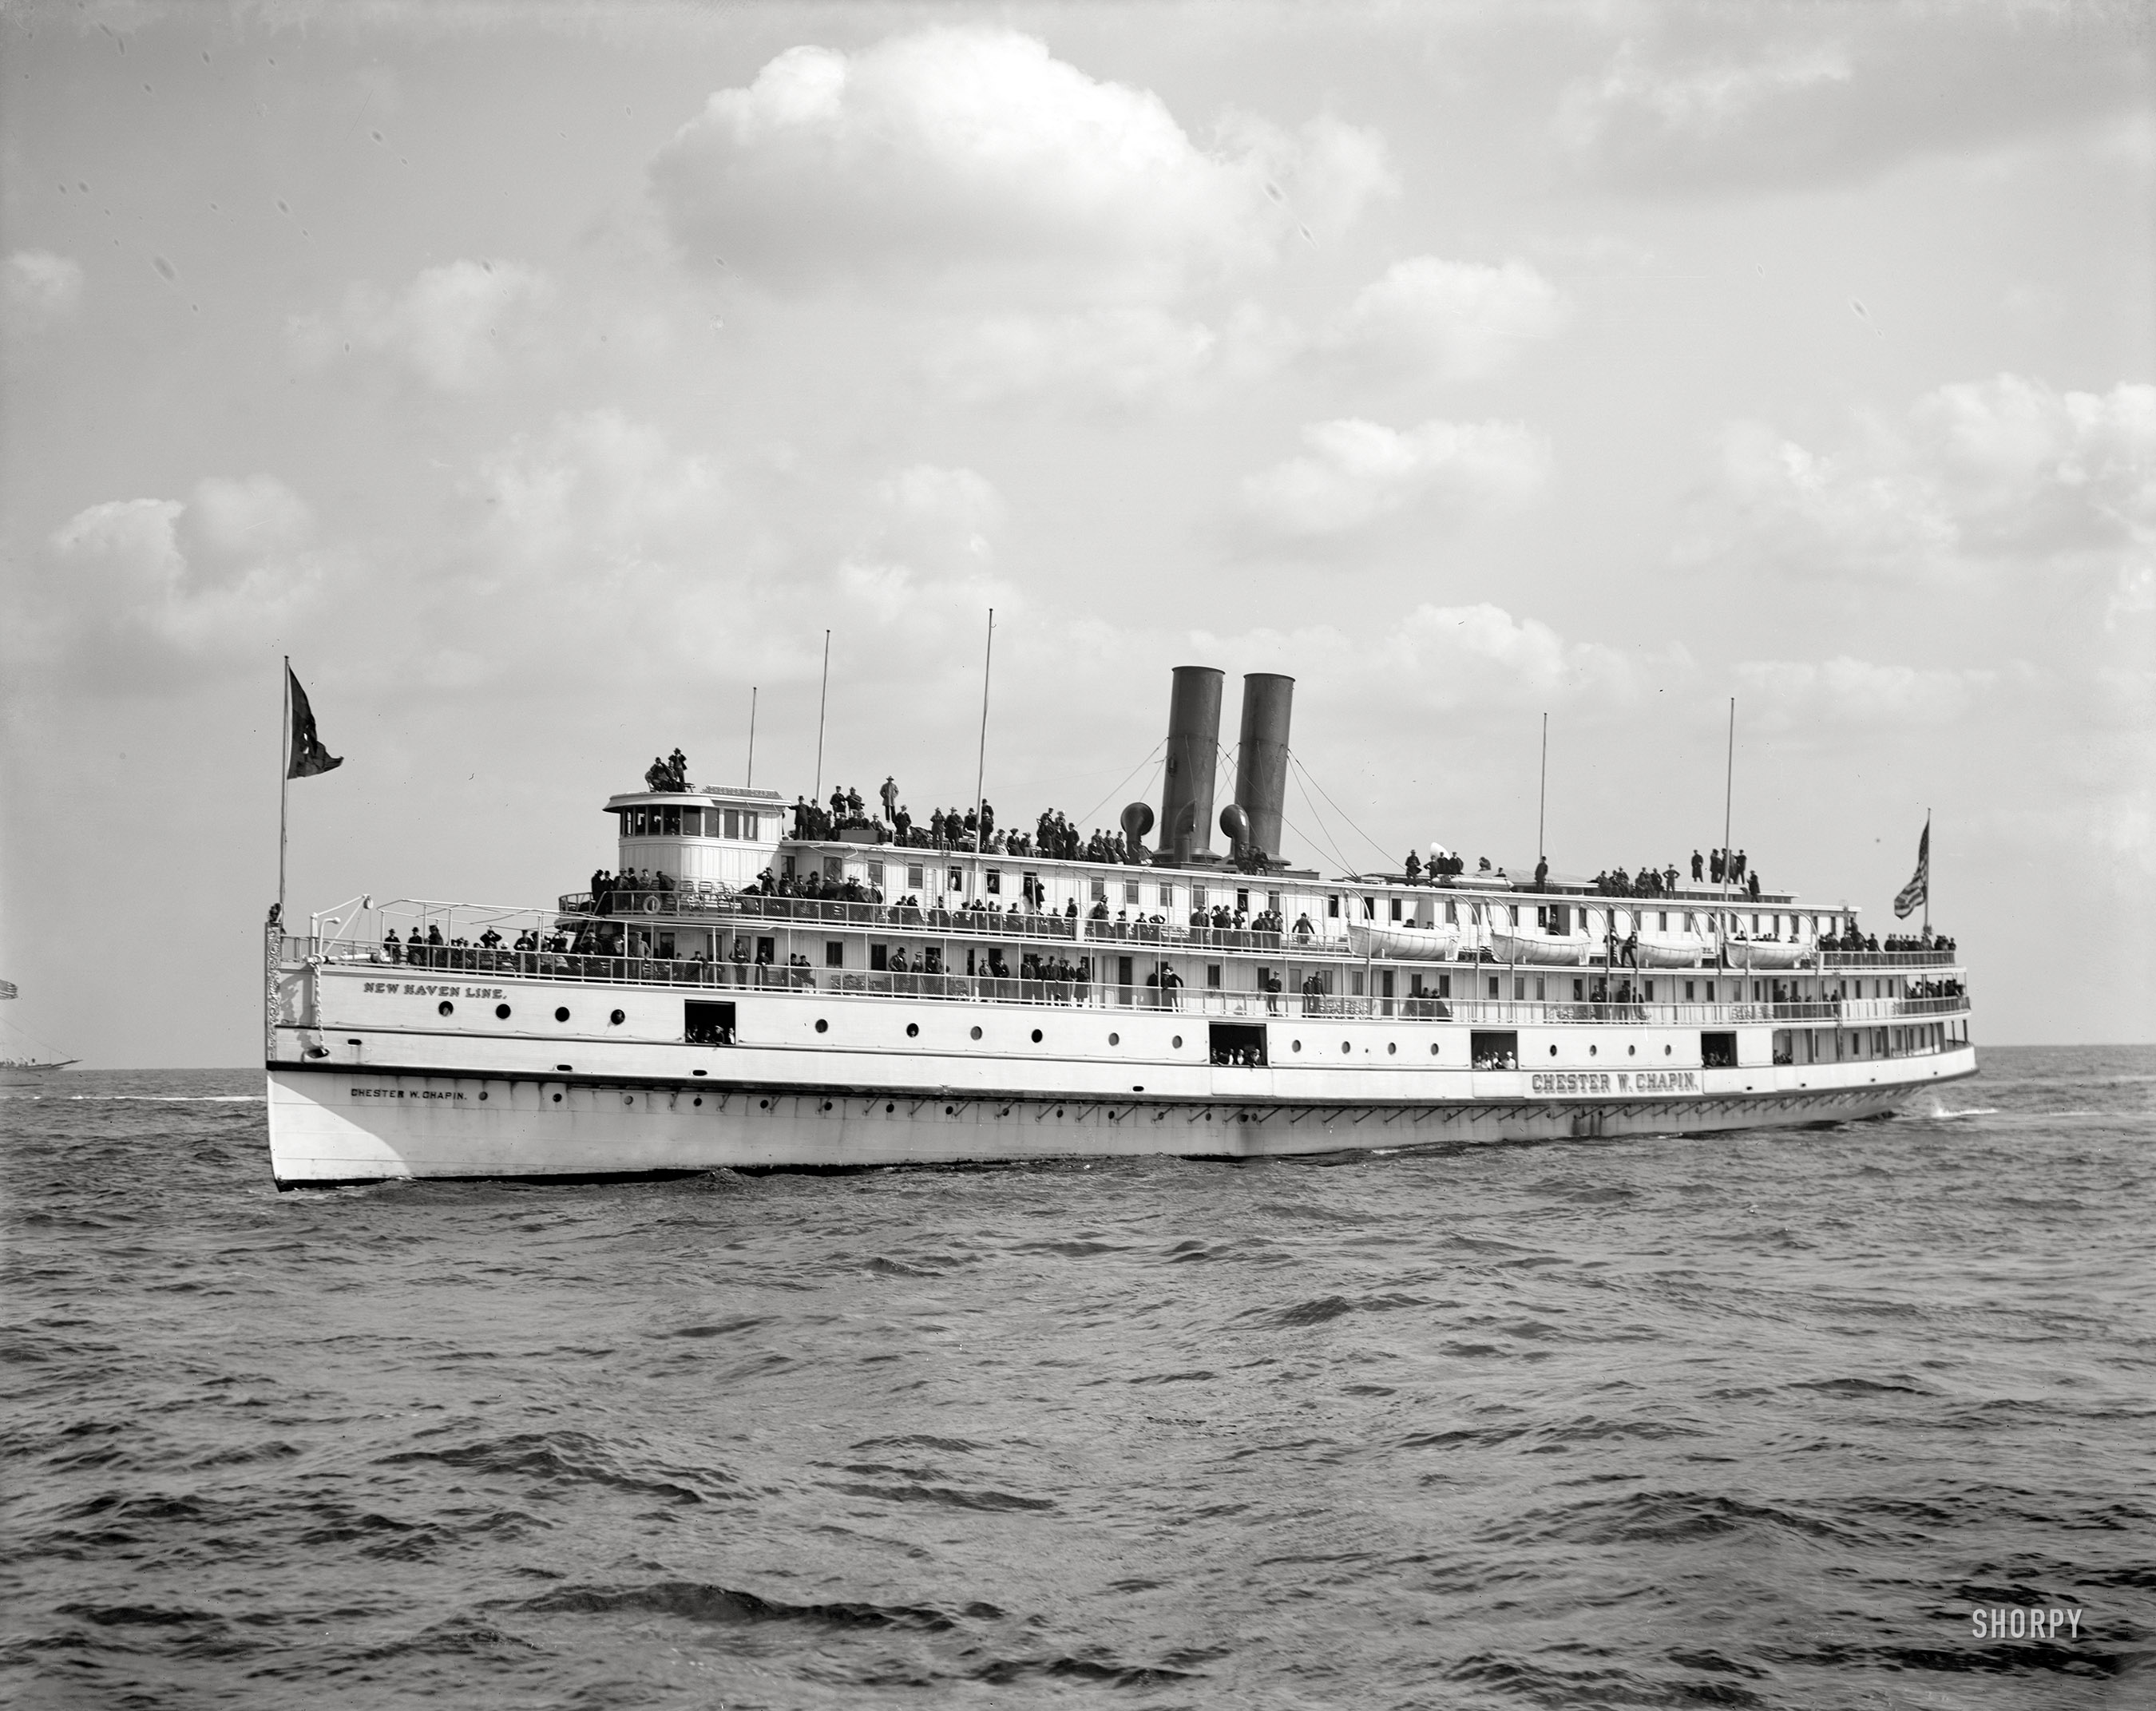 "Chester W. Chapin, New York Yacht Club steamer, America's Cup races, 1901." 8x10 inch dry plate glass negative, Detroit Publishing Company. View full size.